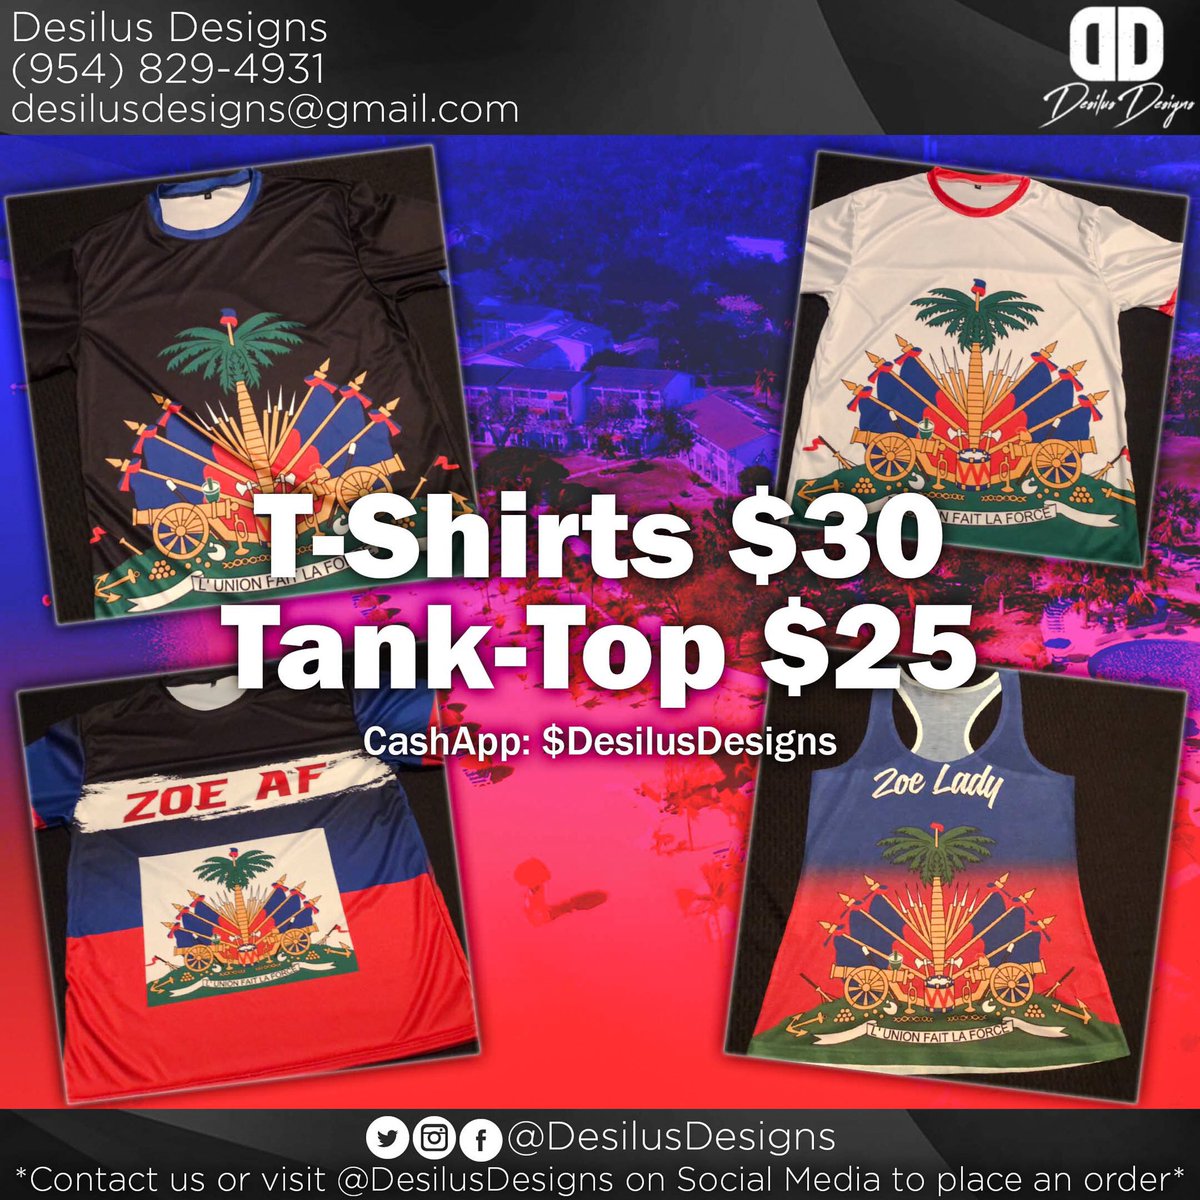 Haitian Flag Day is upon us!  Be sure to make your way to #RumShotOrlando tomorrow and grab your @DesilusDesigns Flag Day apparel 🇭🇹
.
.
.
.
#DesilusDesigns #RumShotOrlando #SupportBlackBusiness #GraphicDesign #EventFlyers #PartyFlyers #Logos #Apparel #ApparelPrinting